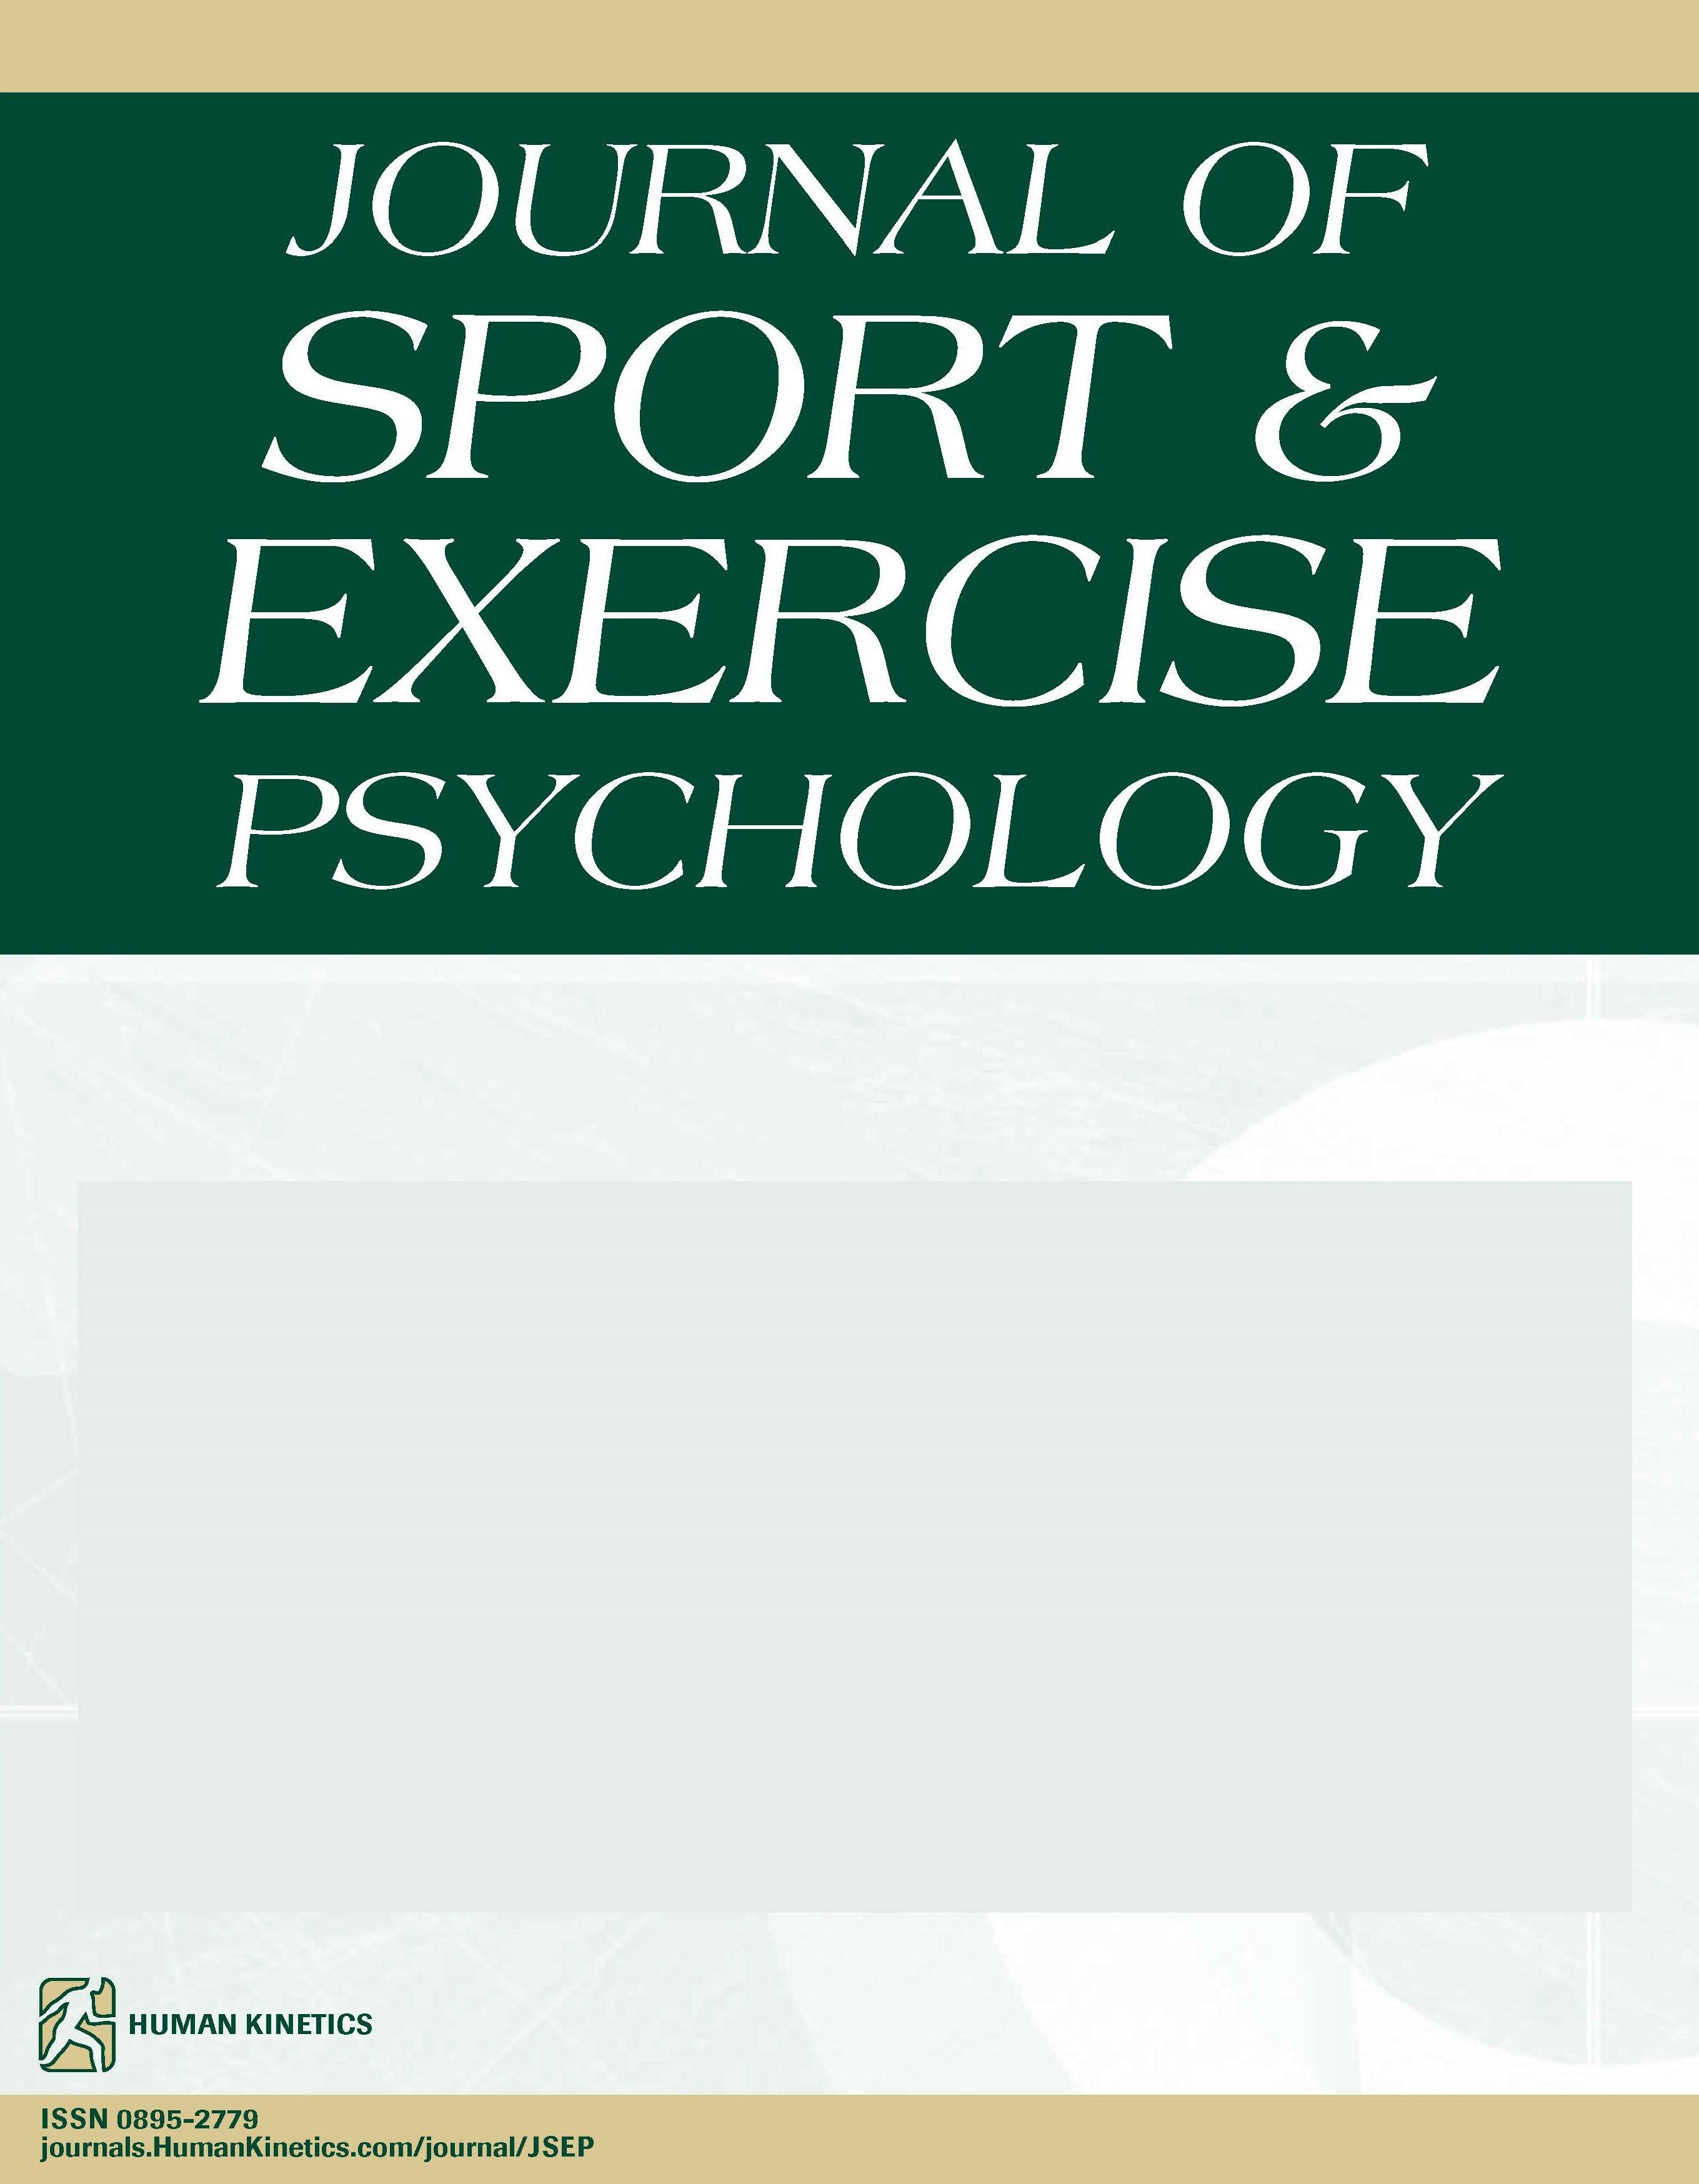 Children’s Motivation Profiles in Sports and Physical Activities: A Latent Profile Analysis and Self-Determination Theory Approach